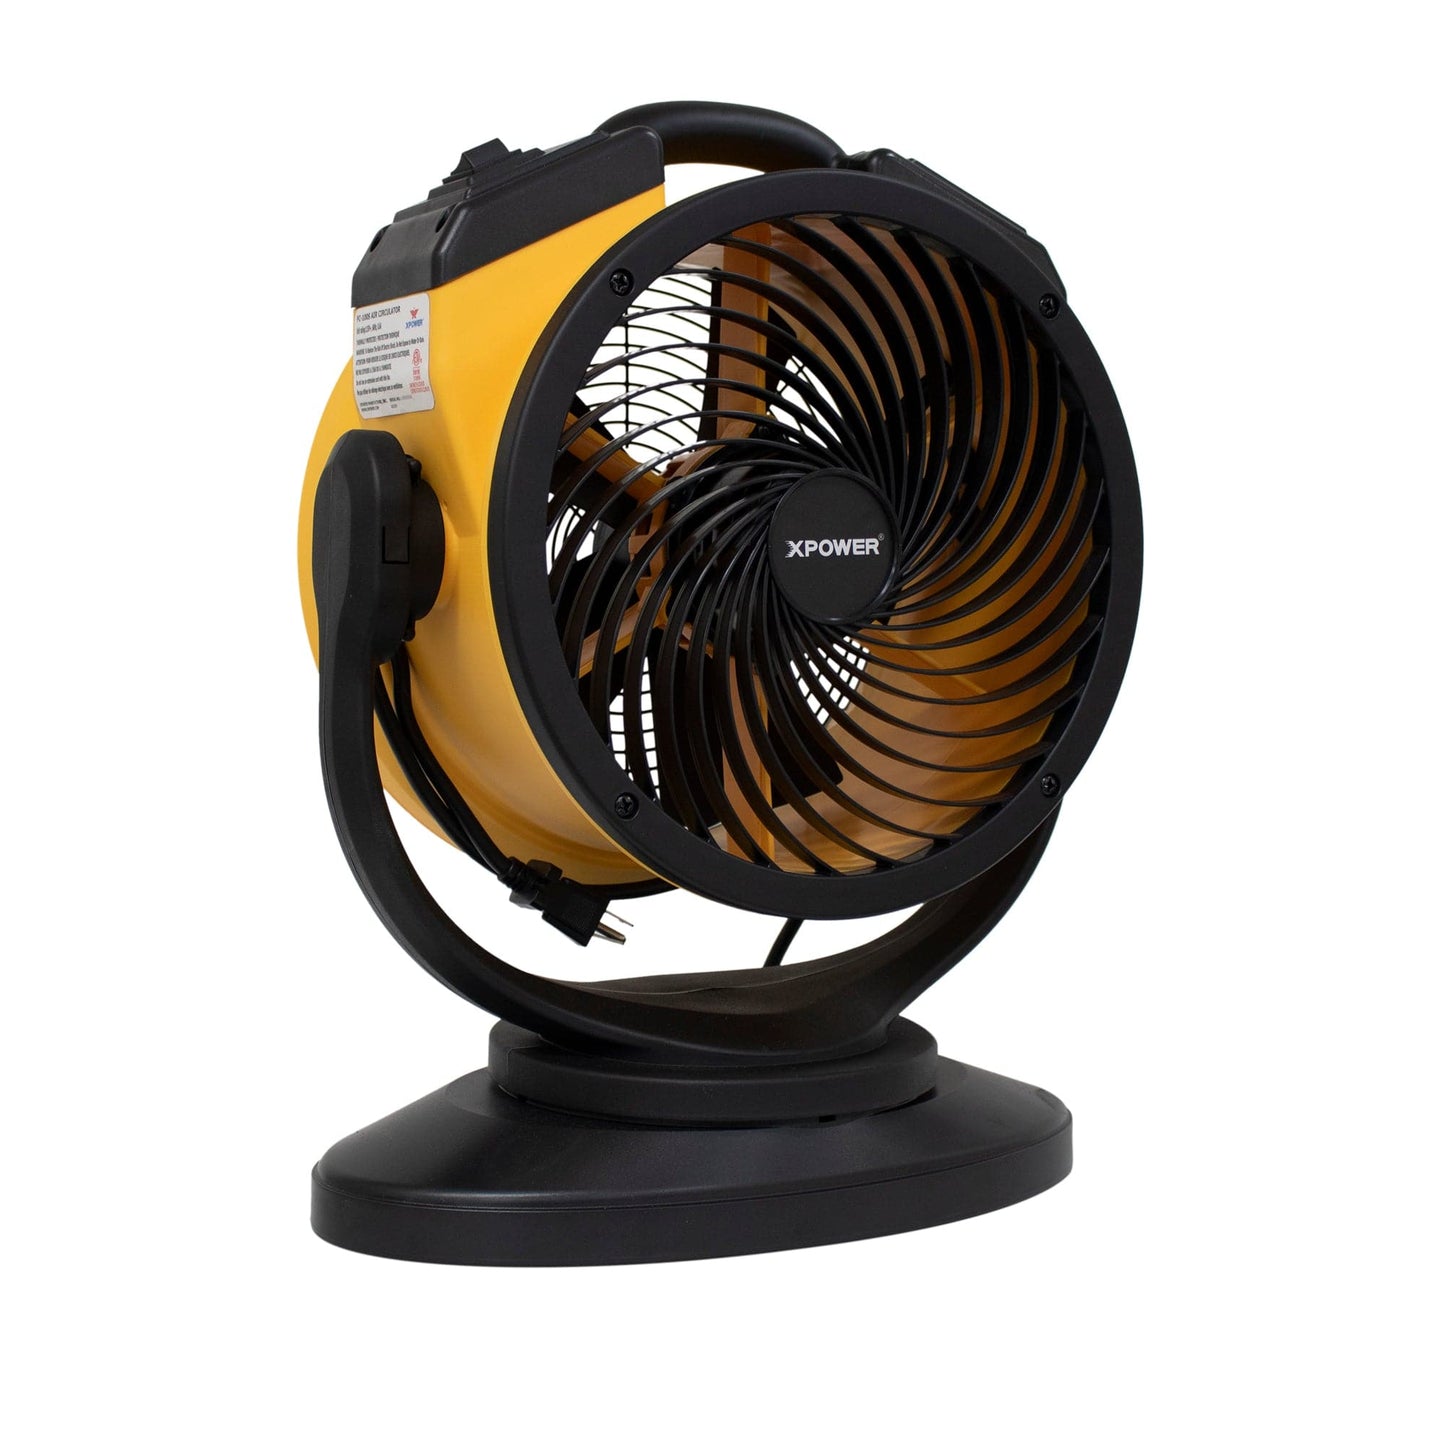 XPOWER FC-100S 1100 CFM 4 Speed Portable Multipurpose 11" Pro Air Circulator Utility Fan with Oscillating Feature